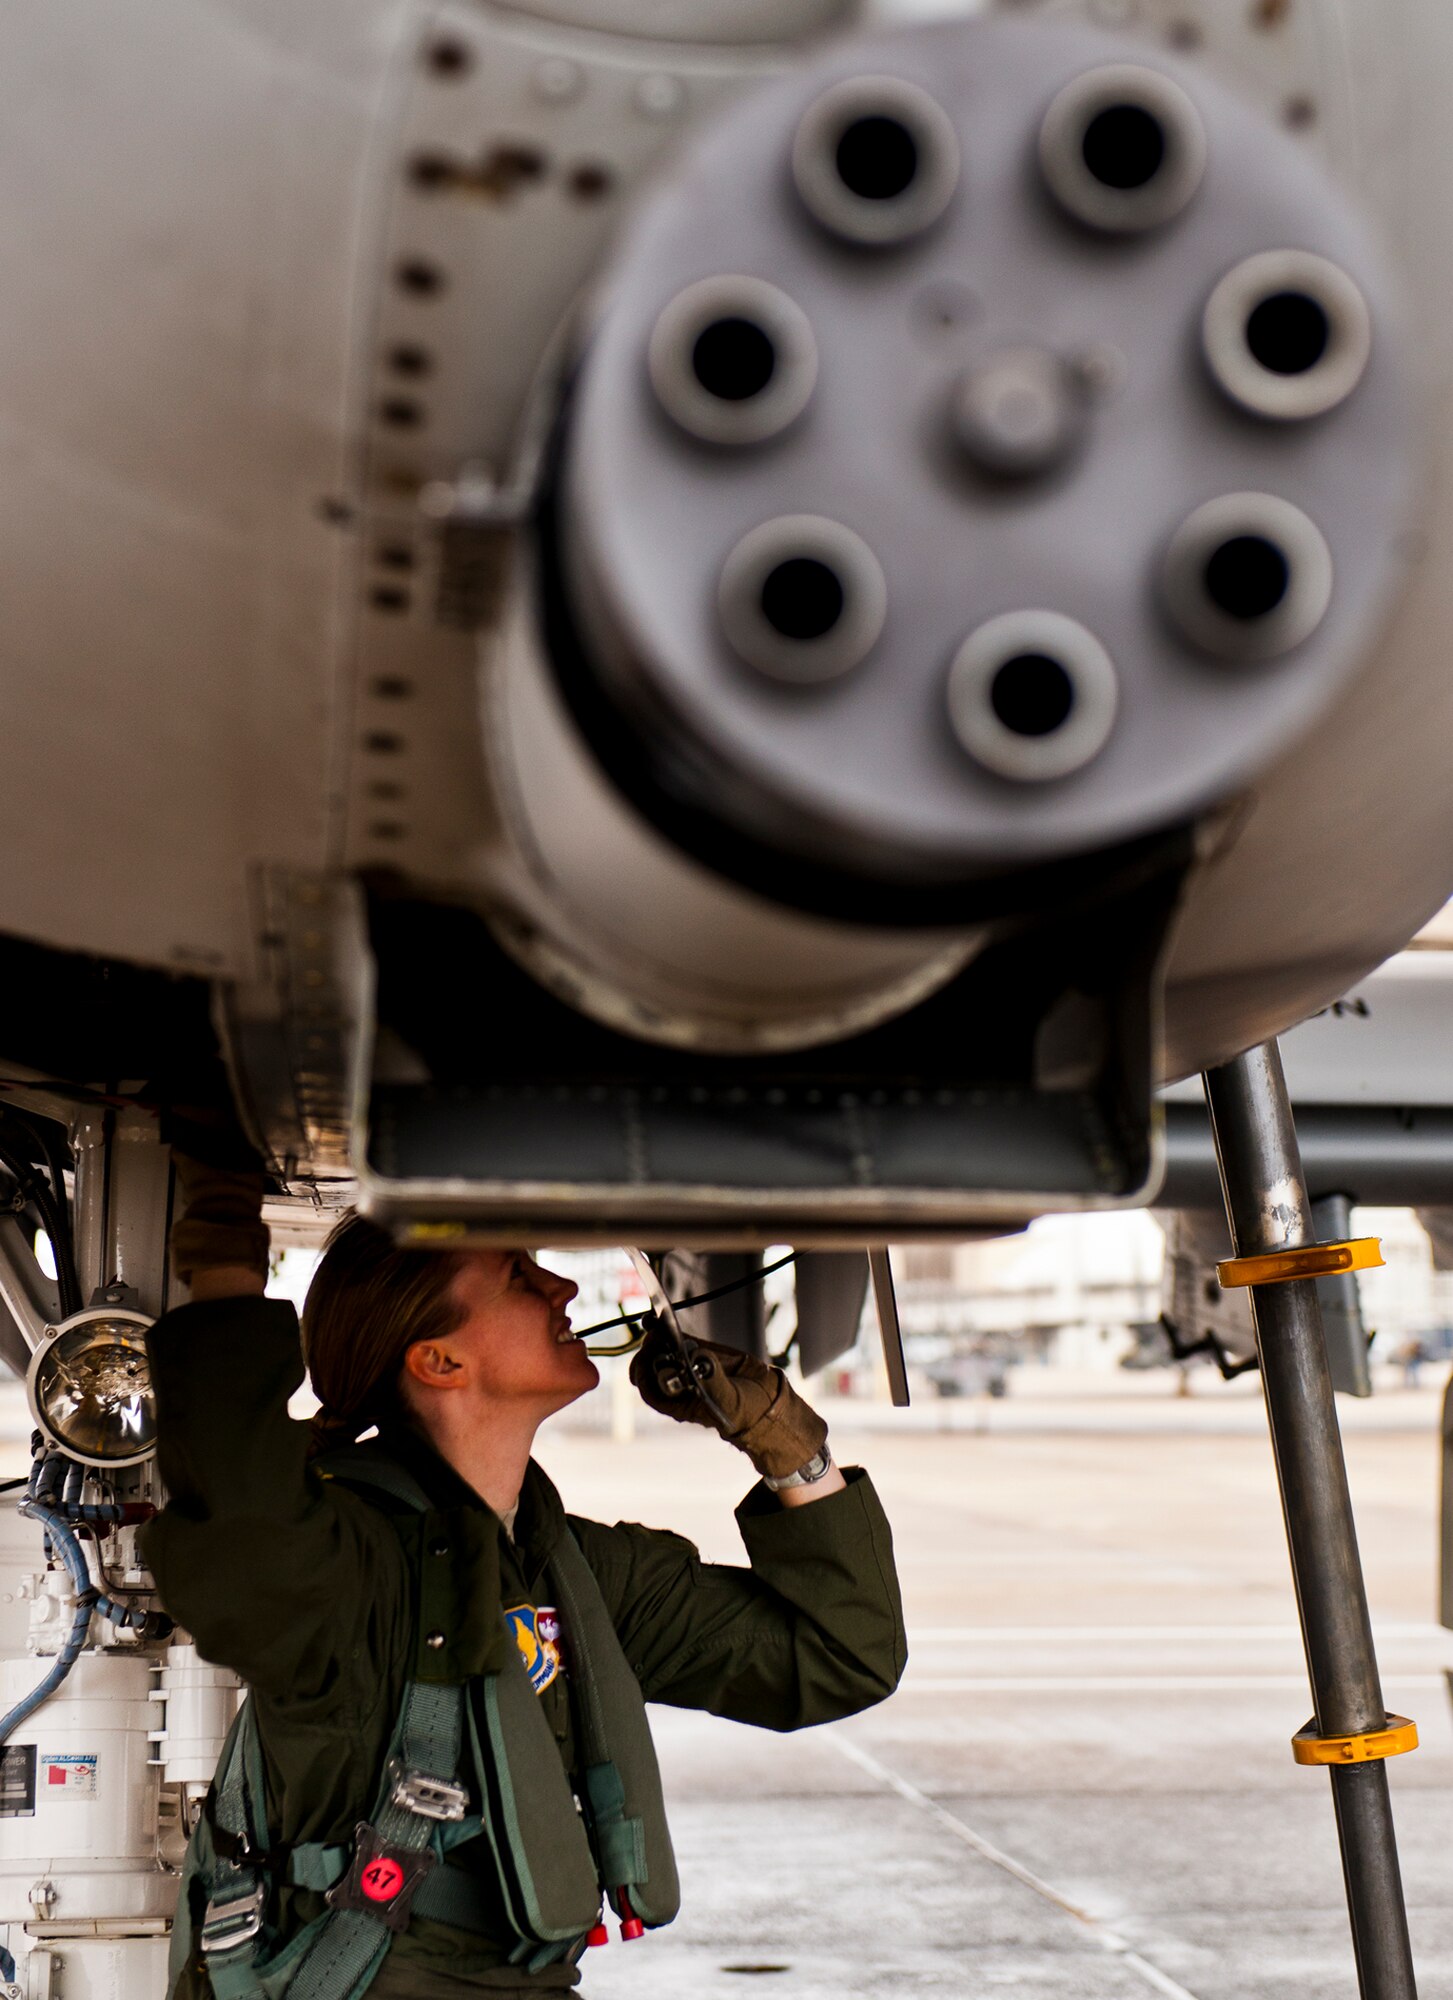 Maj. Olivia Elliott, of the 40th Flight Test Squadron, completes preflight checks of her A-10 Thunderbolt II prior to a test mission Jan. 10 at Eglin Air Force Base, Fla.  Her mission was to wrap up flight testing of the new Net-T software upgrade on the LITENING II advanced targeting pod.  The new upgrade allows the pod to provide ground forces beyond-line-of-sight command and control capabilities as long as the aircraft is within range.  This is the first-ever test of this new capability.   (U.S. Air Force photo/Samuel King Jr.)